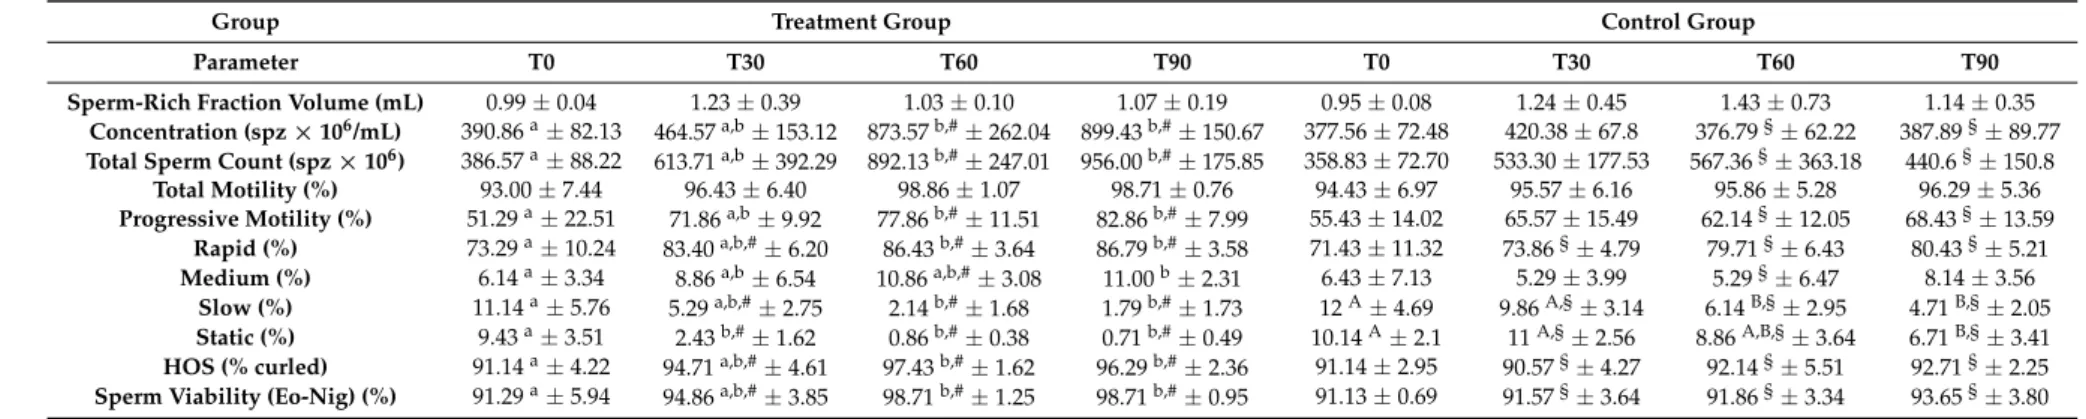 Table 2. Quantitative and qualitative parameters along time, reported as mean ± SD, obtained from all dogs from the same group (Treatment and Control group)